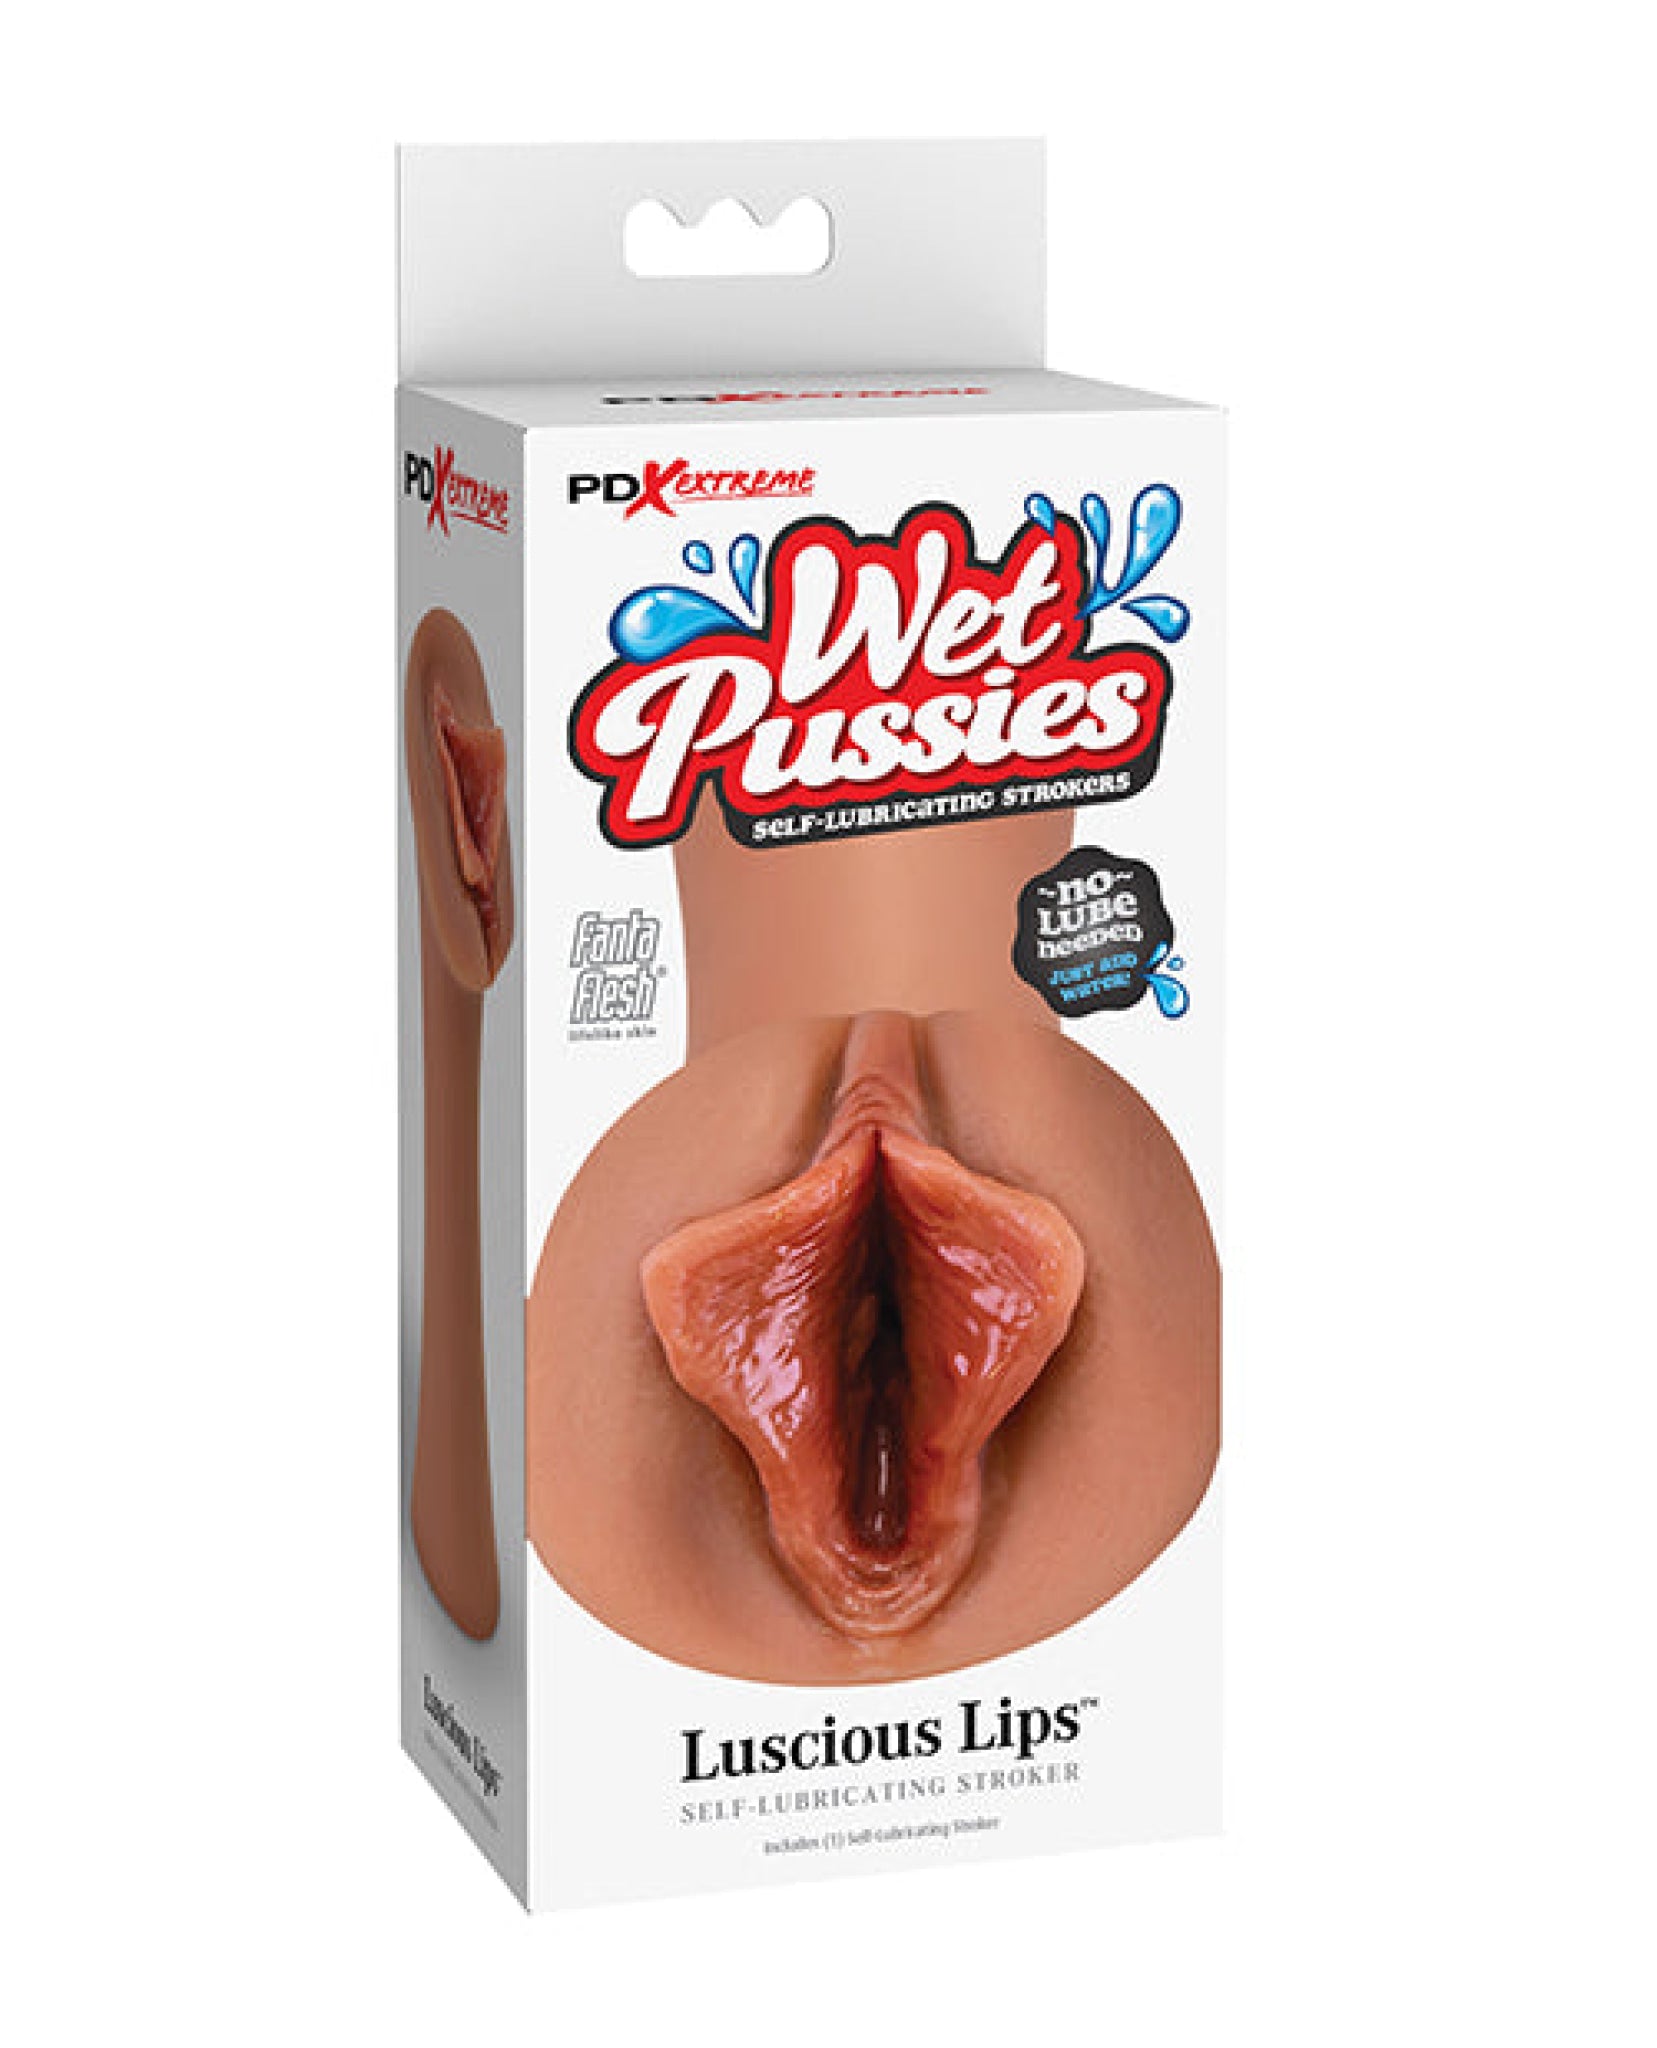 Pdx Extreme Wet Pussies Luscious Lips Pdx